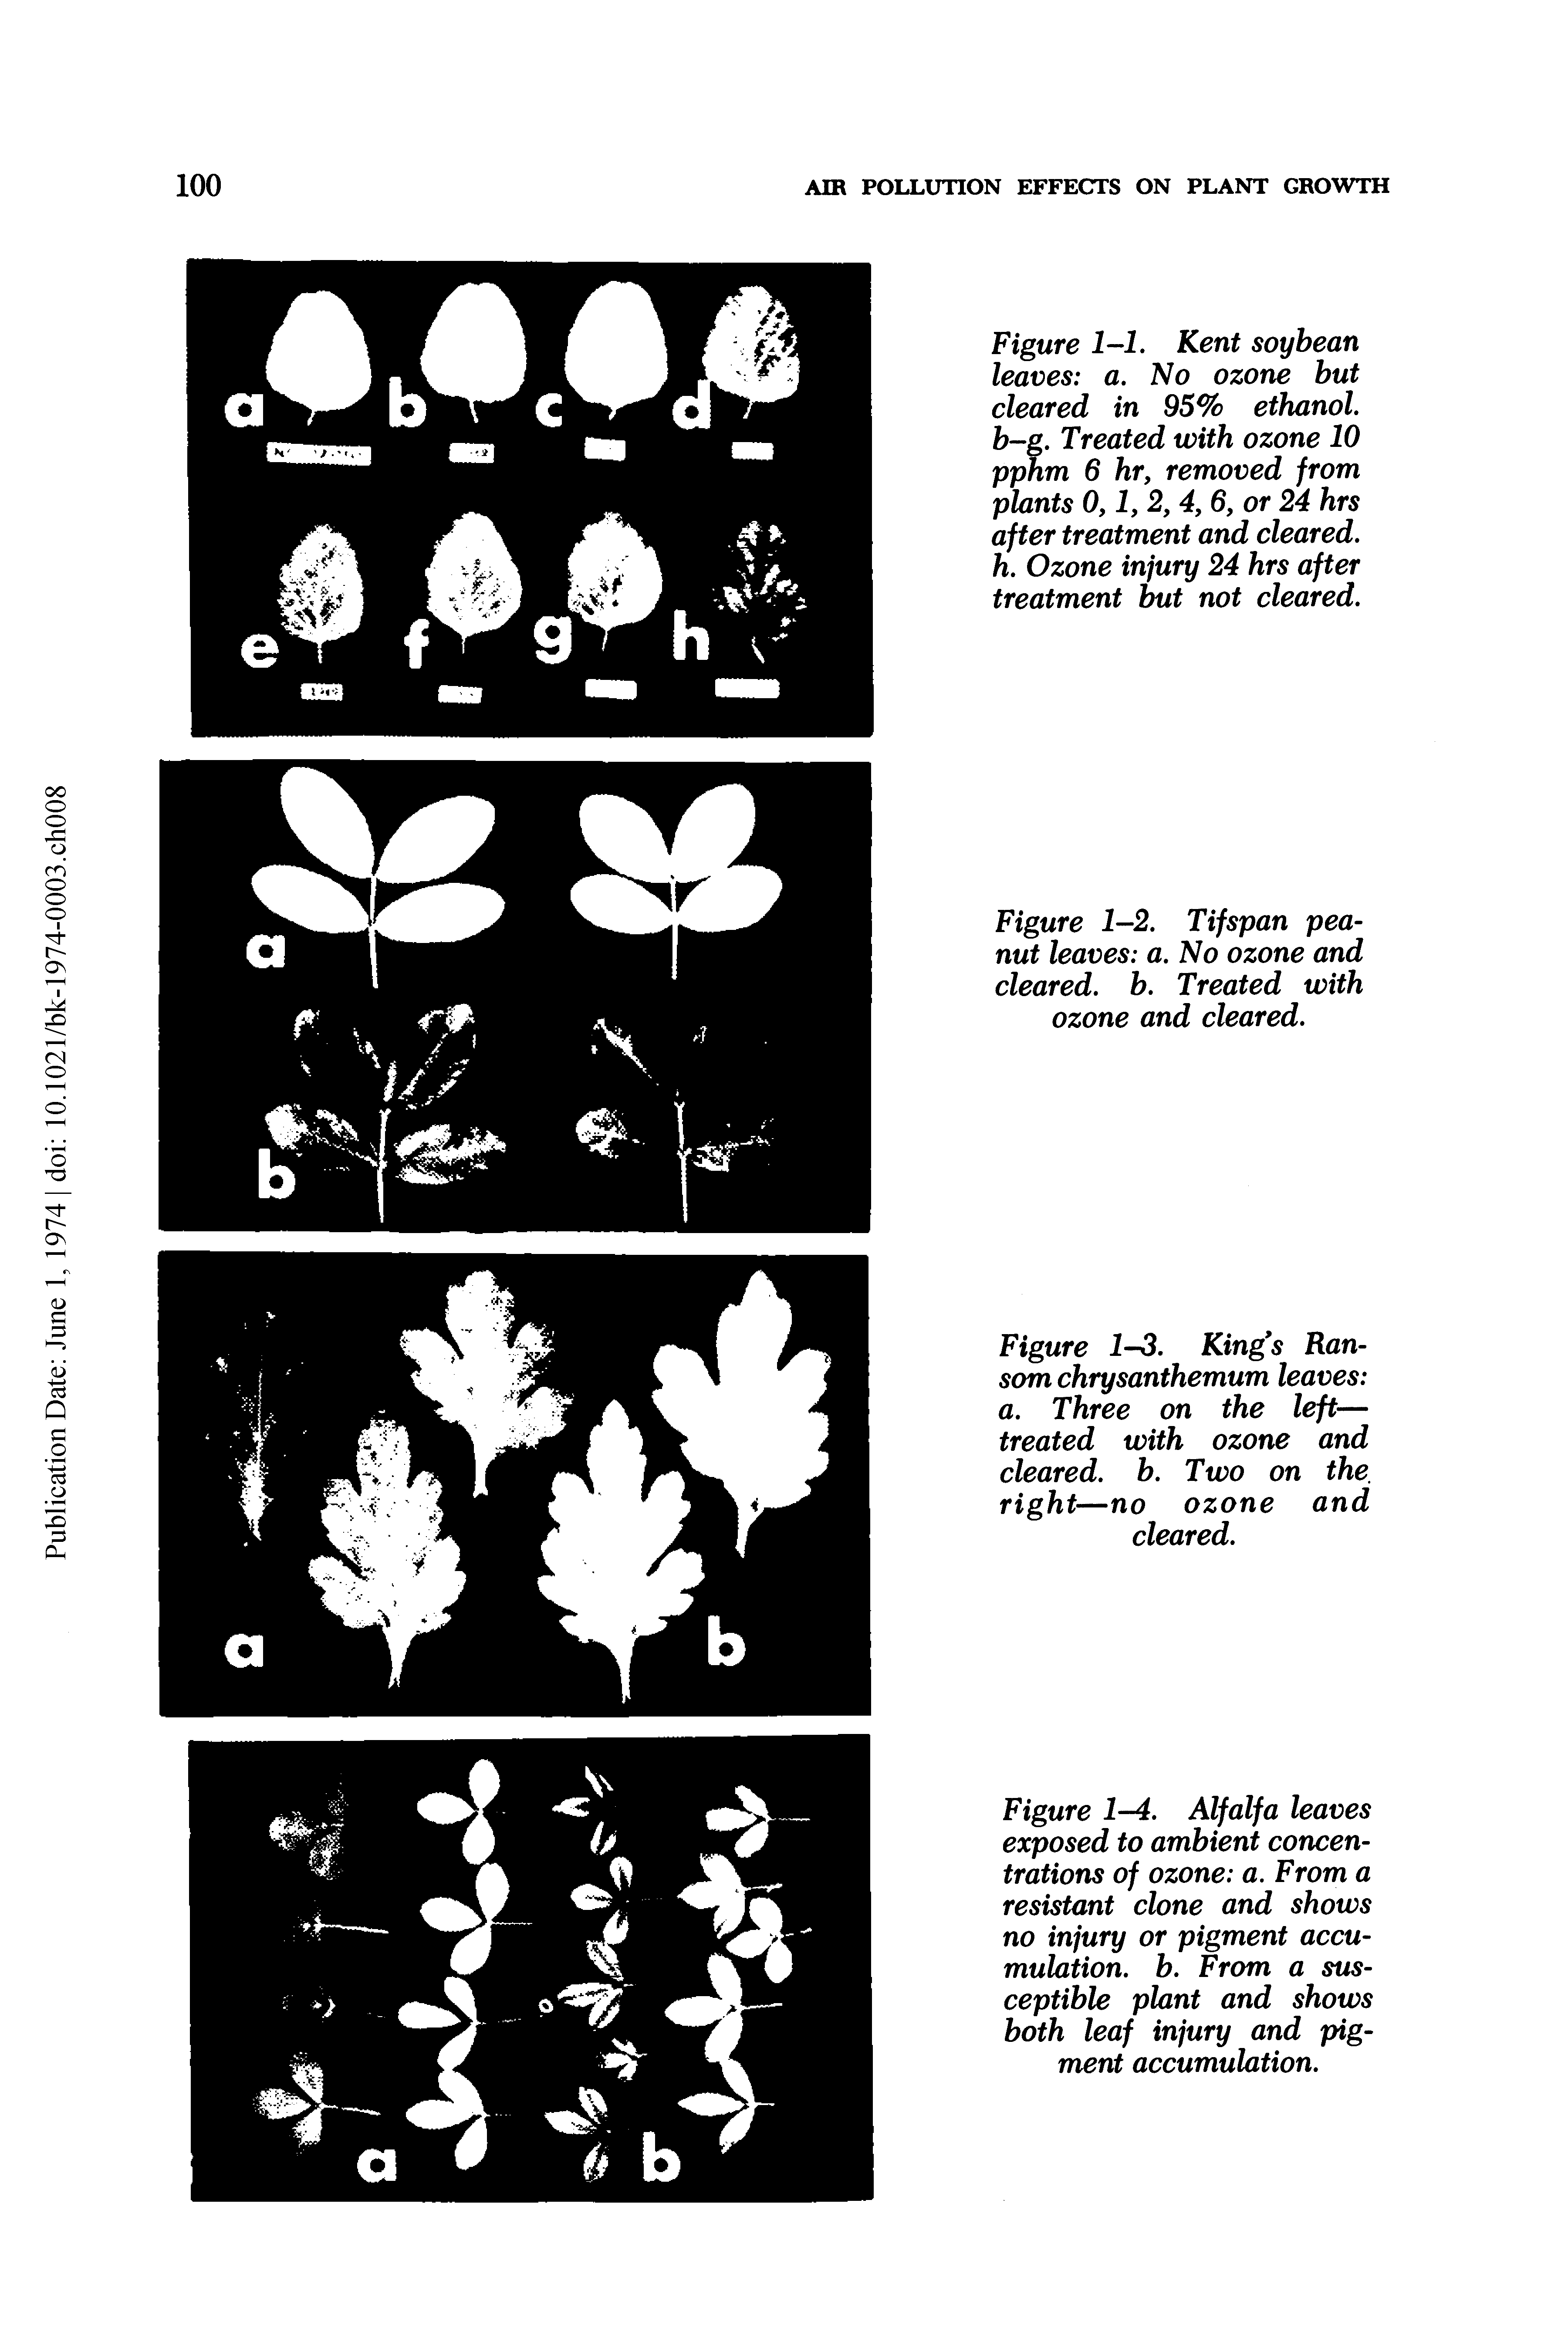 Figure 1-4. Alfalfa leaves exposed to ambient concentrations of ozone a. From a resistant clone and shows no injury or pigment accumulation. b. From a susceptible plant and shows both leaf injury and pigment accumulation.